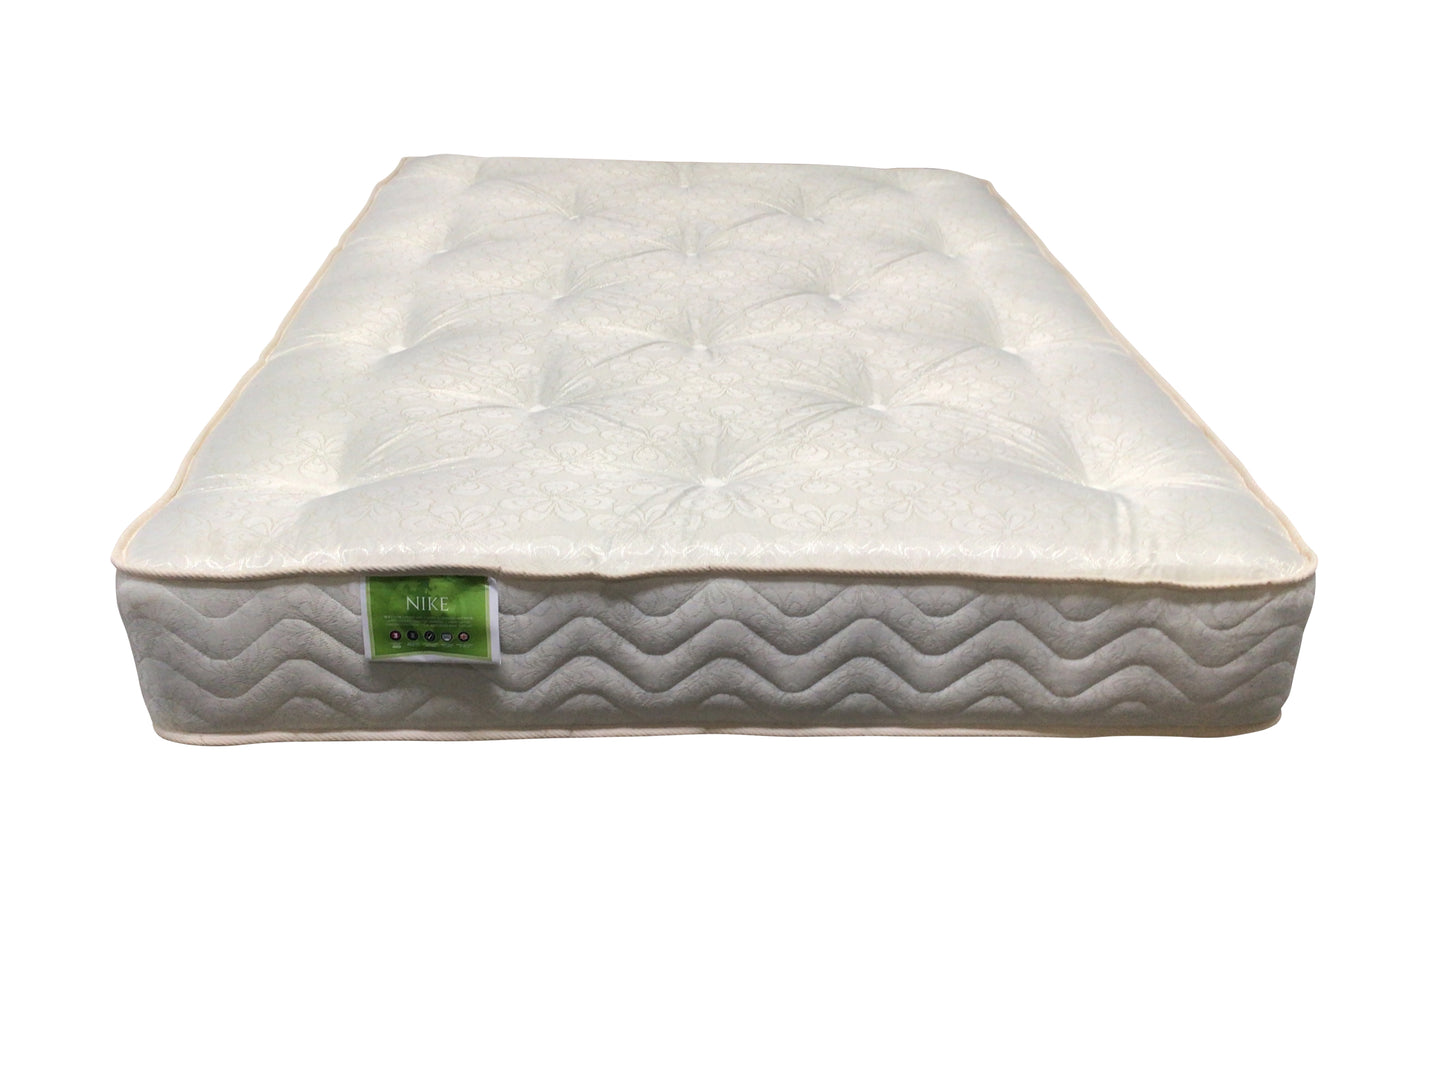 Nike 4ft Small Double Coil Sprung Mattress